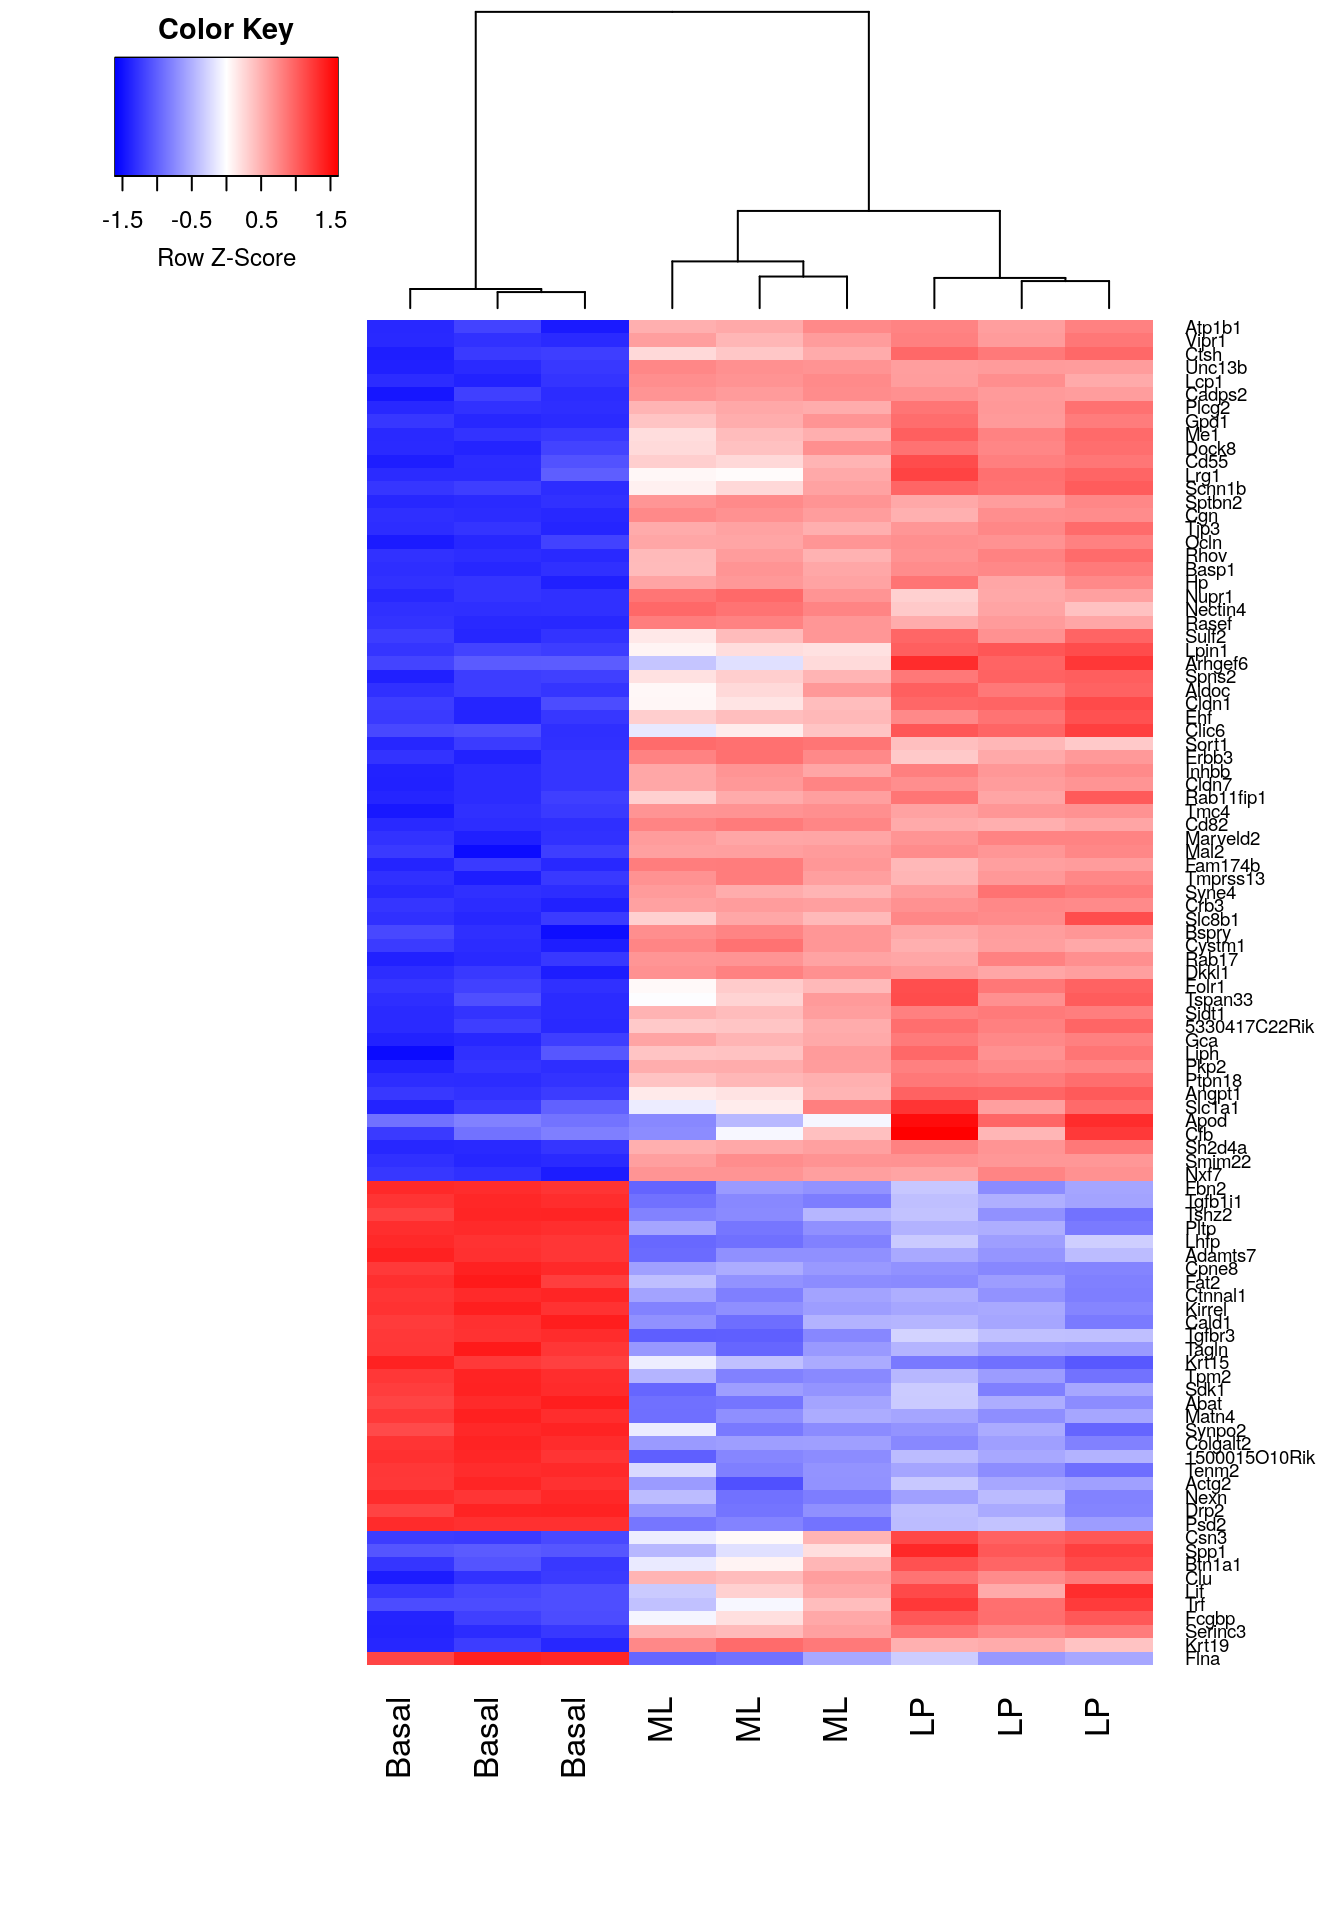 Heatmap of log-CPM values for top 100 genes DE in basal versus LP. Expression across each gene (or row) have been scaled so that mean expression is zero and standard deviation is one. Samples with relatively high expression of a given gene are marked in red and samples with relatively low expression are marked in blue. Lighter shades and white represent genes with intermediate expression levels. Samples and genes have been reordered by the method of hierarchical clustering. A dendrogram is shown for the sample clustering.